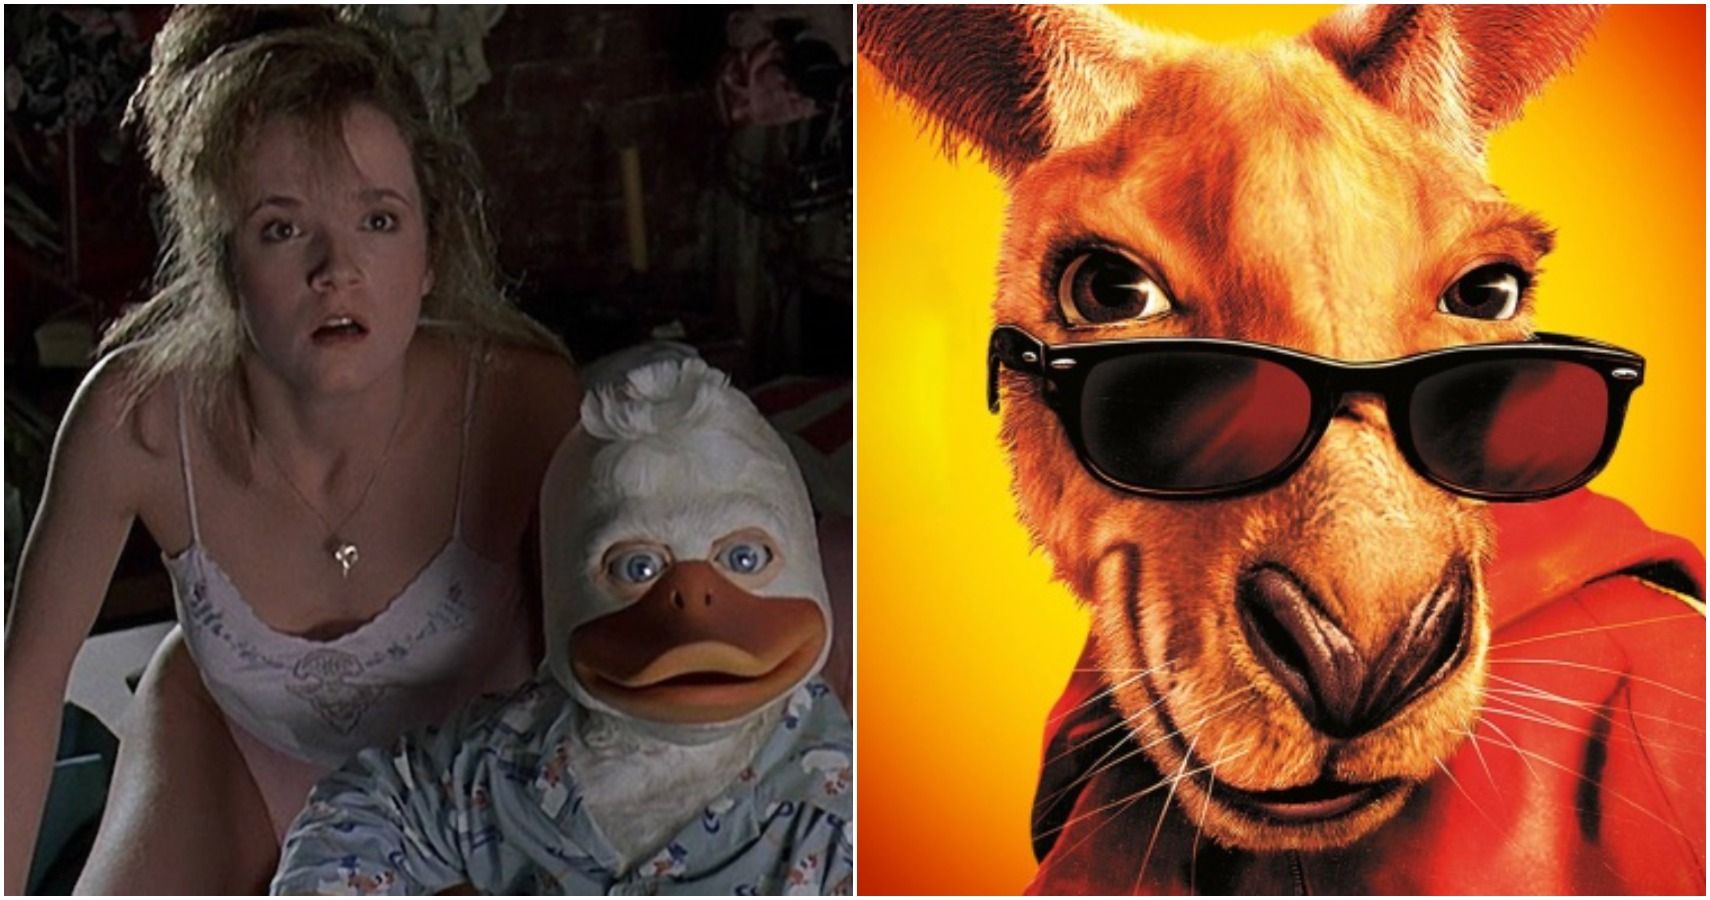 An image from the film Howard the Duck next to an image from Kangaroo Jack.